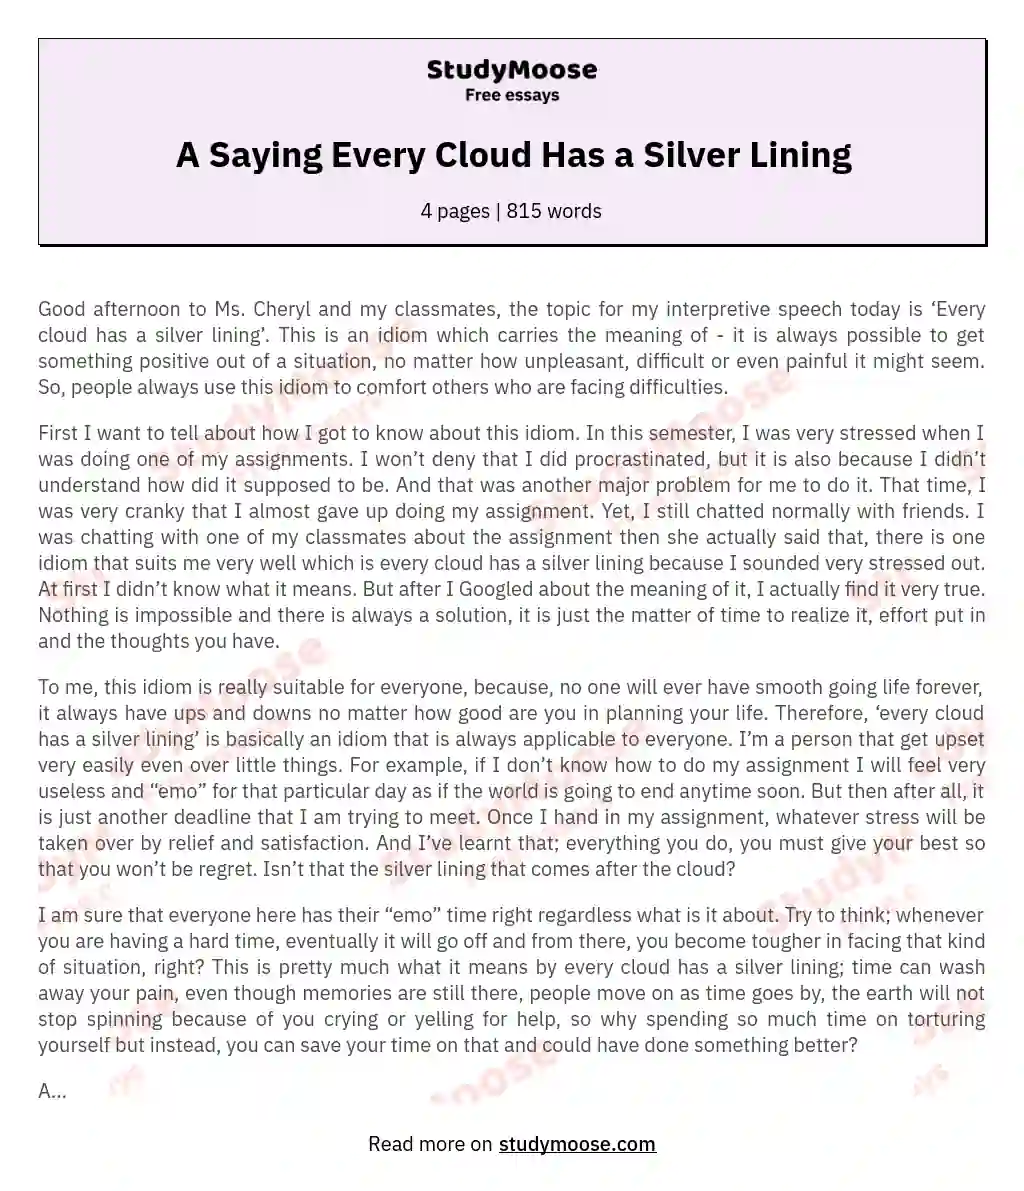 A Saying Every Cloud Has a Silver Lining essay